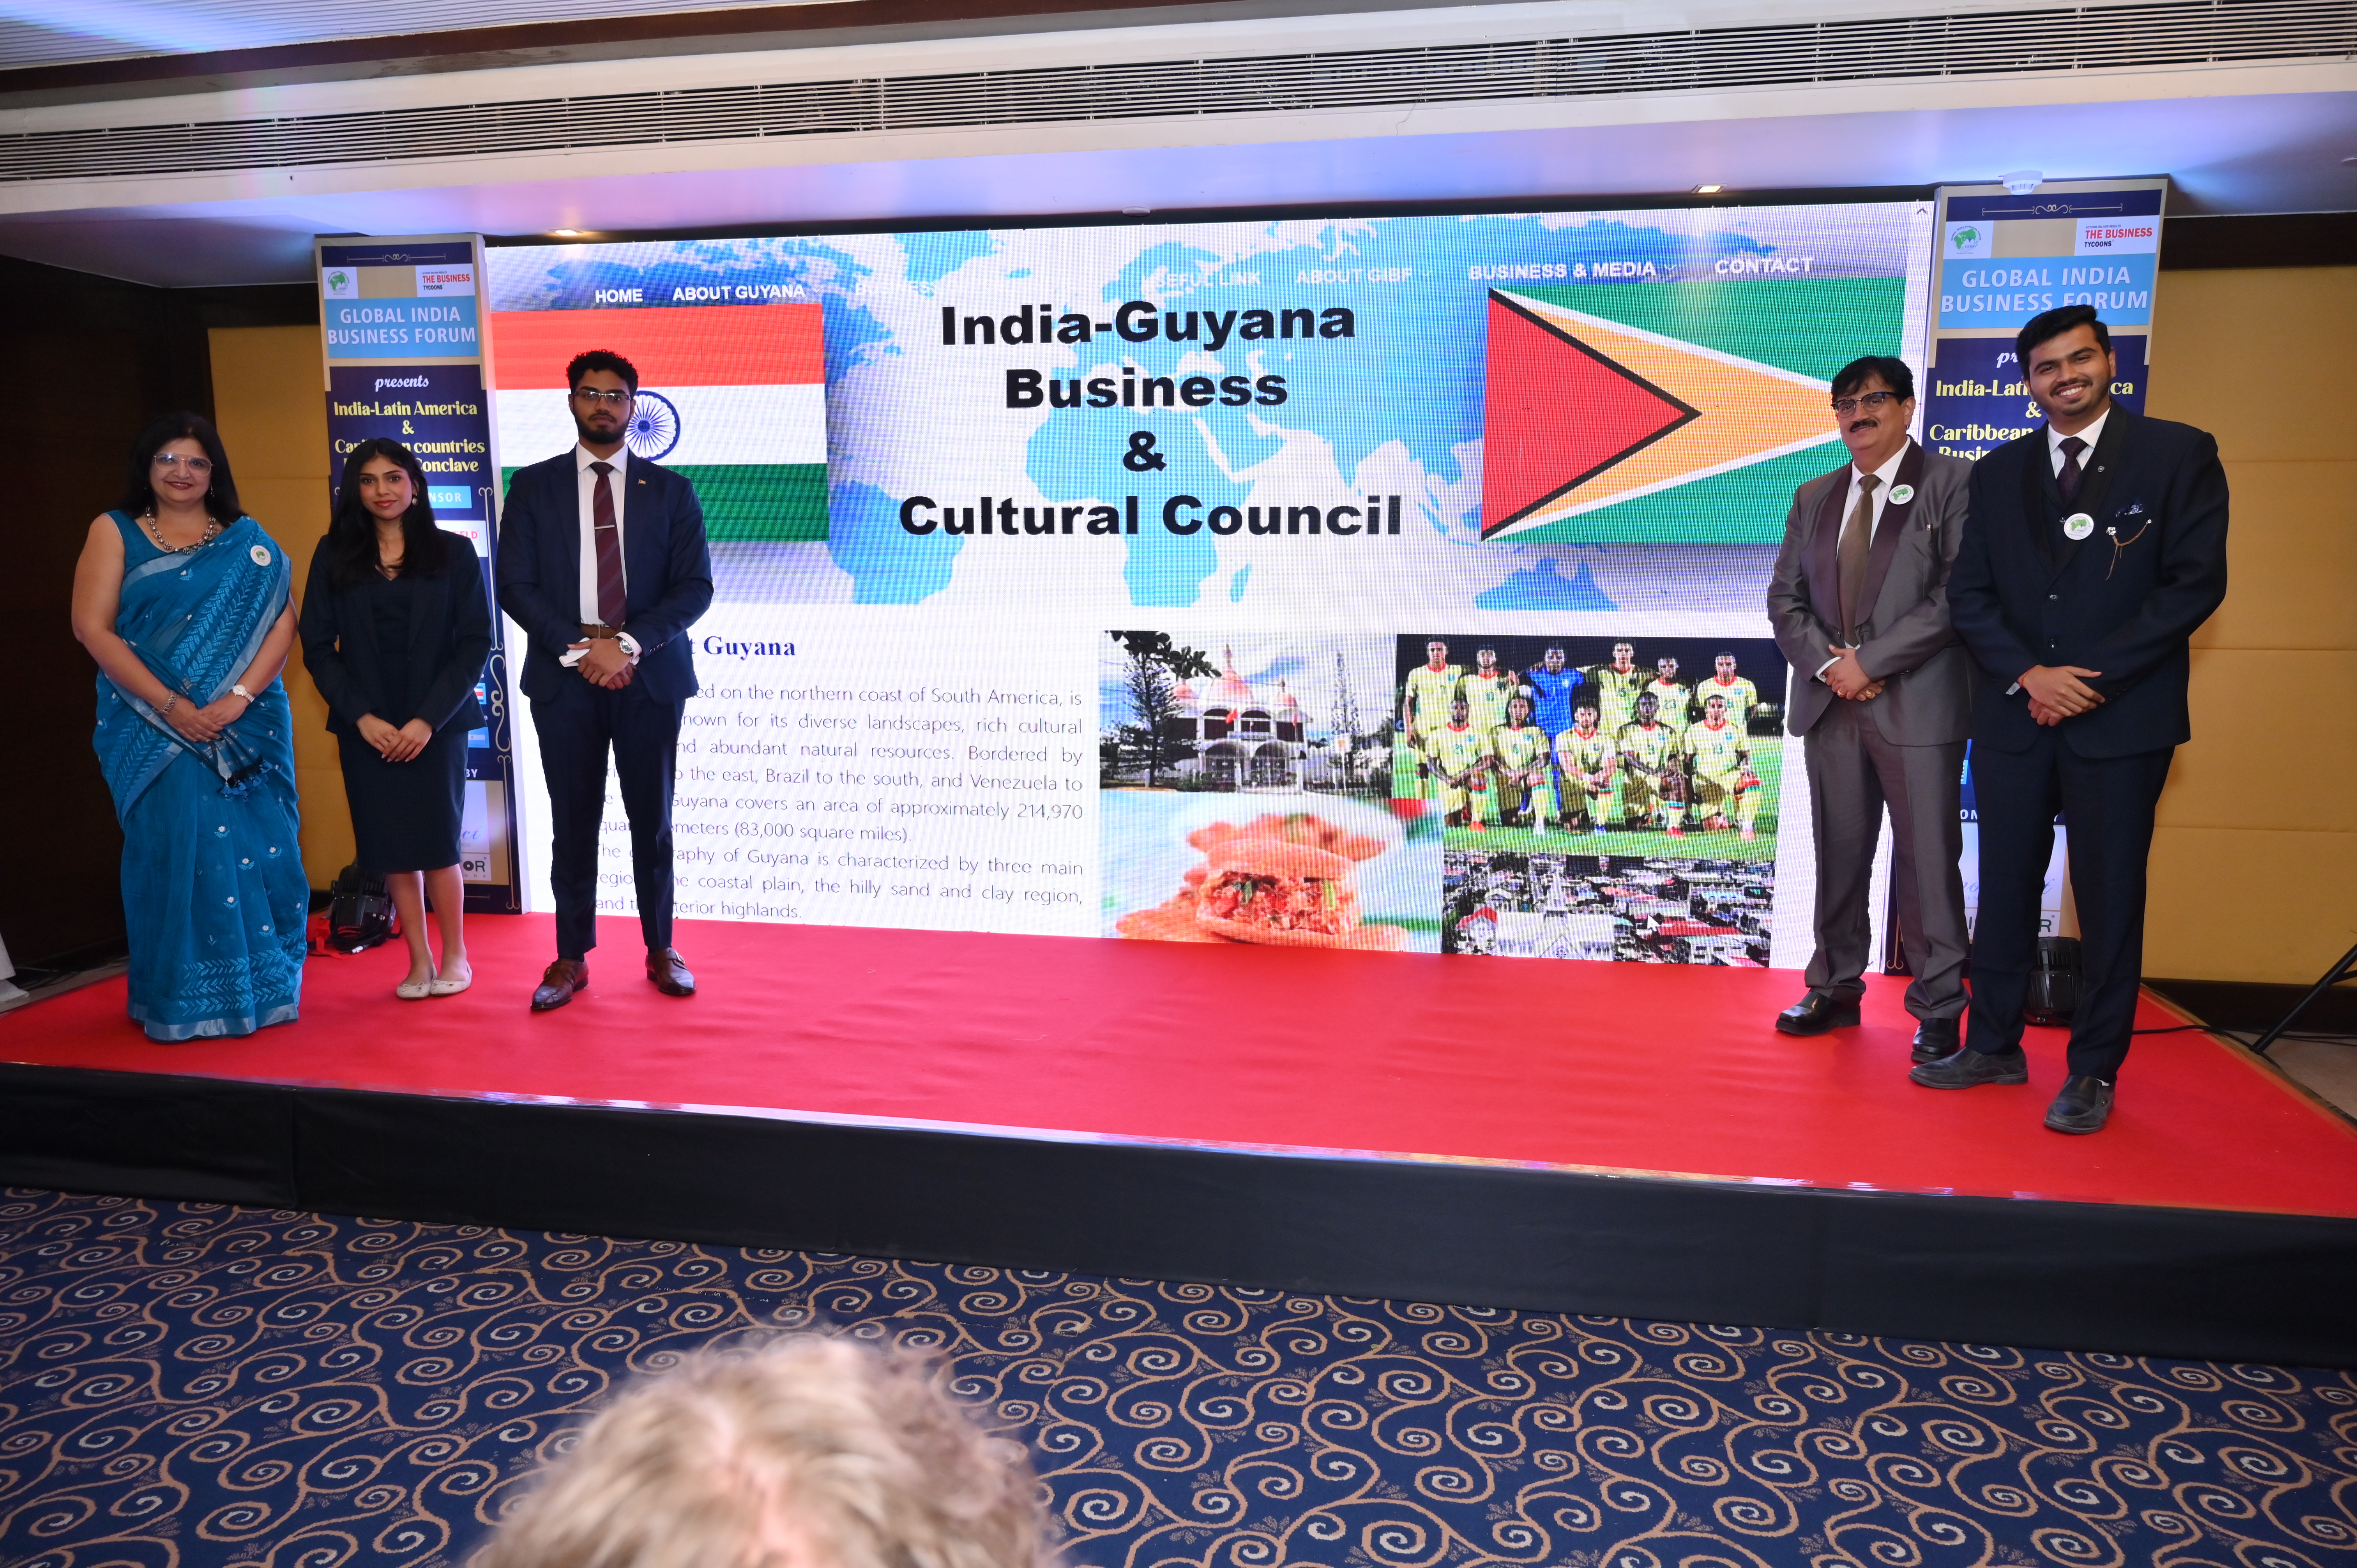 gibf-past-event-india-latin-america-and-caribbean-country-business-conclave-guyana-website-of-india-guyana-business-and-cultural-council-2024